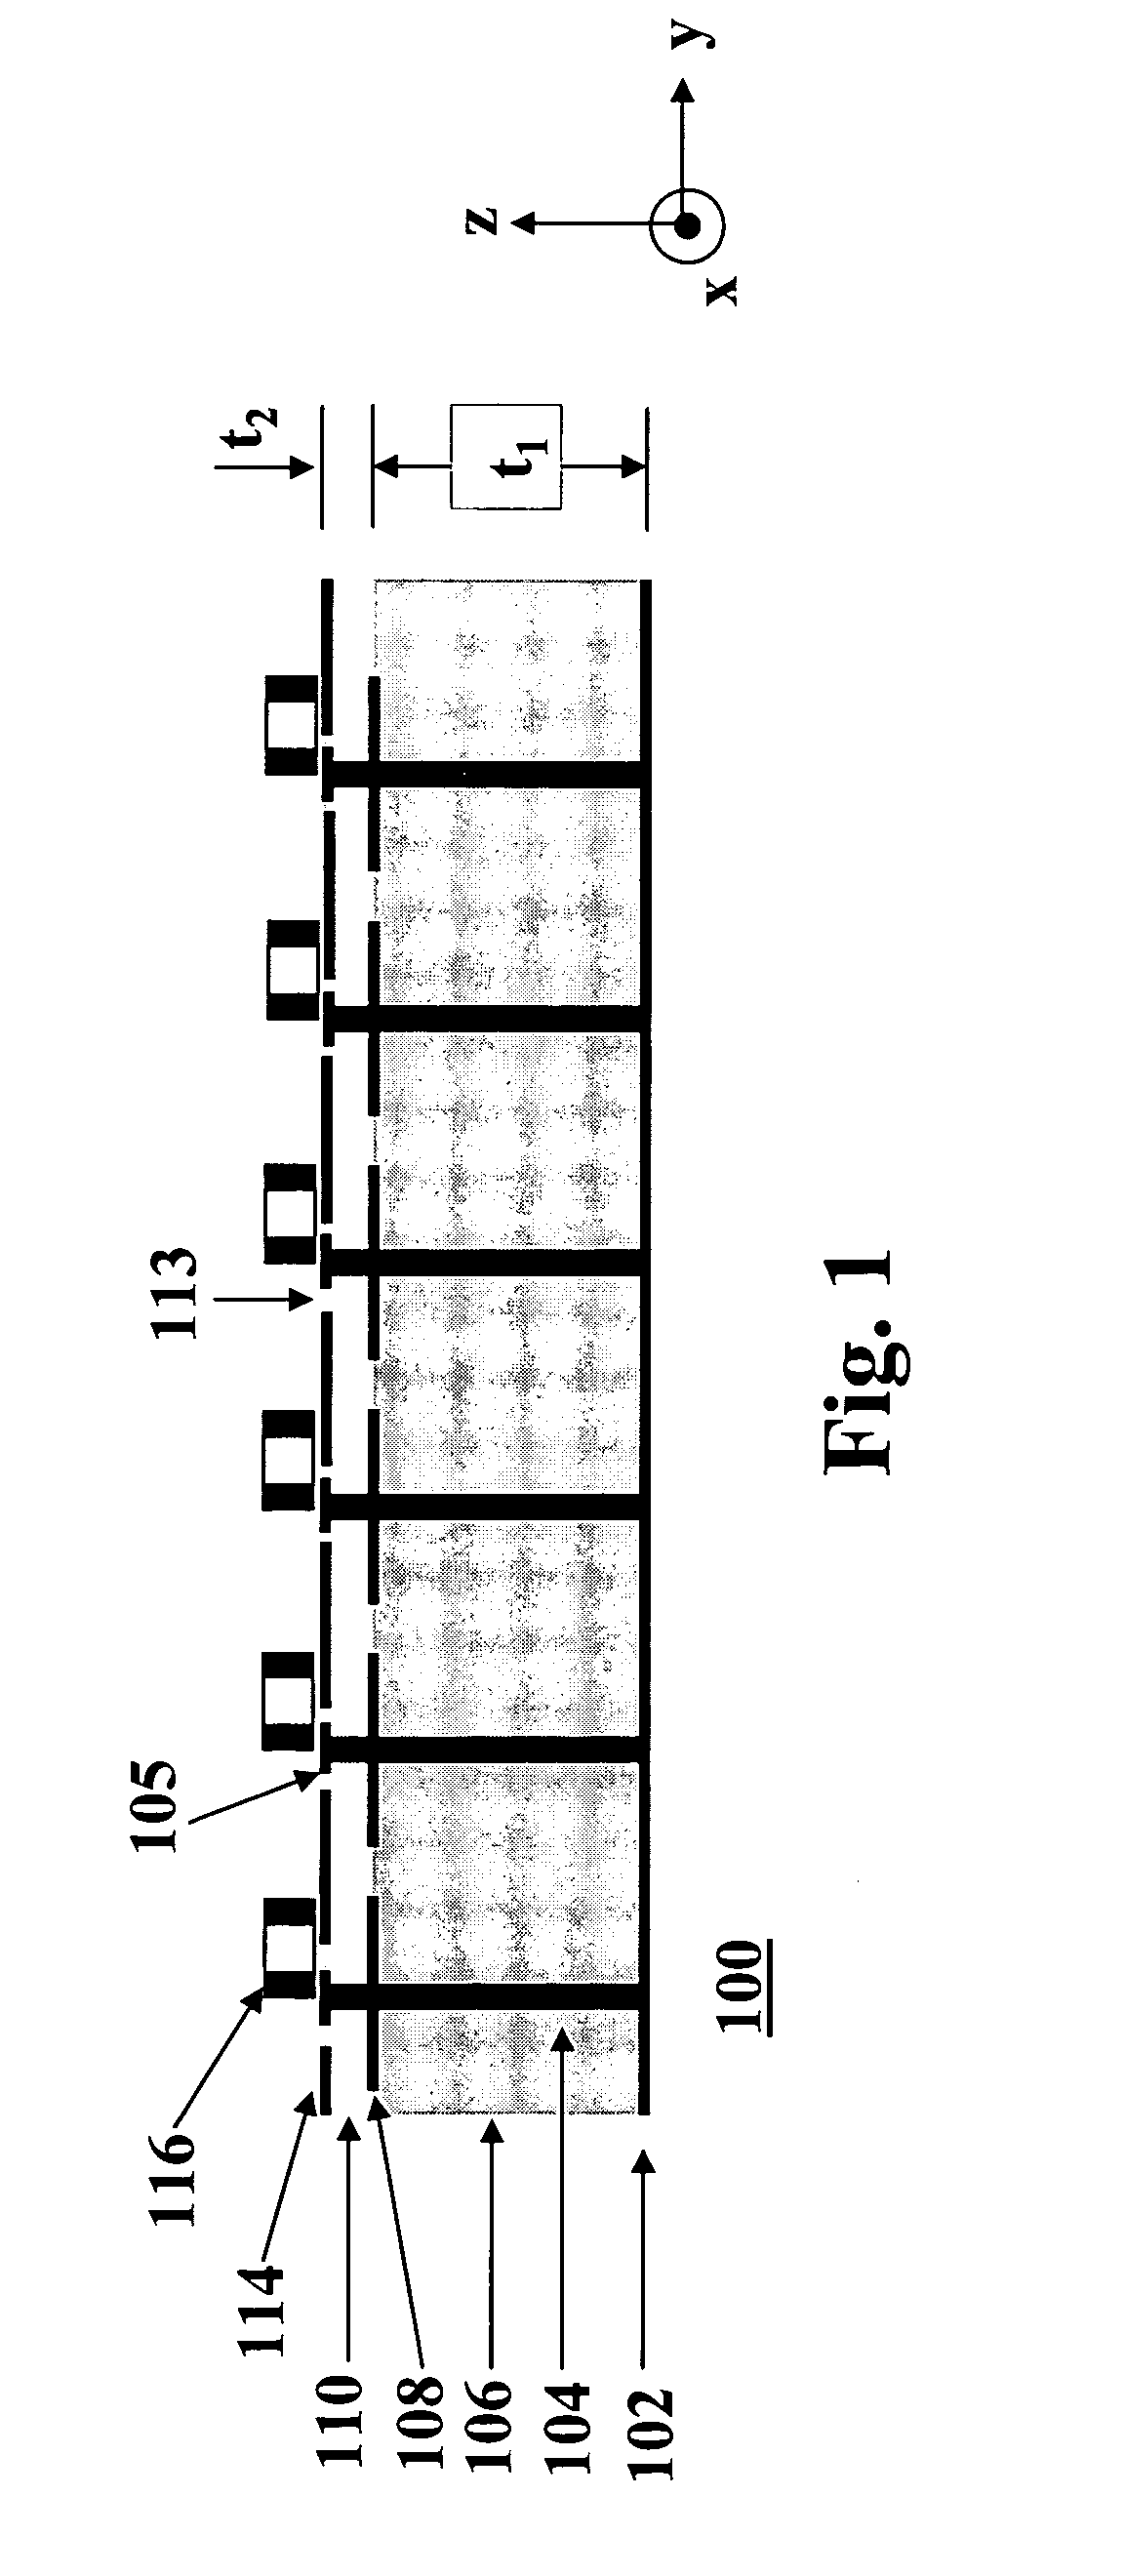 Circuit and method for enhanced low frequency switching noise suppression in multilayer printed circuit boards using a chip capacitor lattice